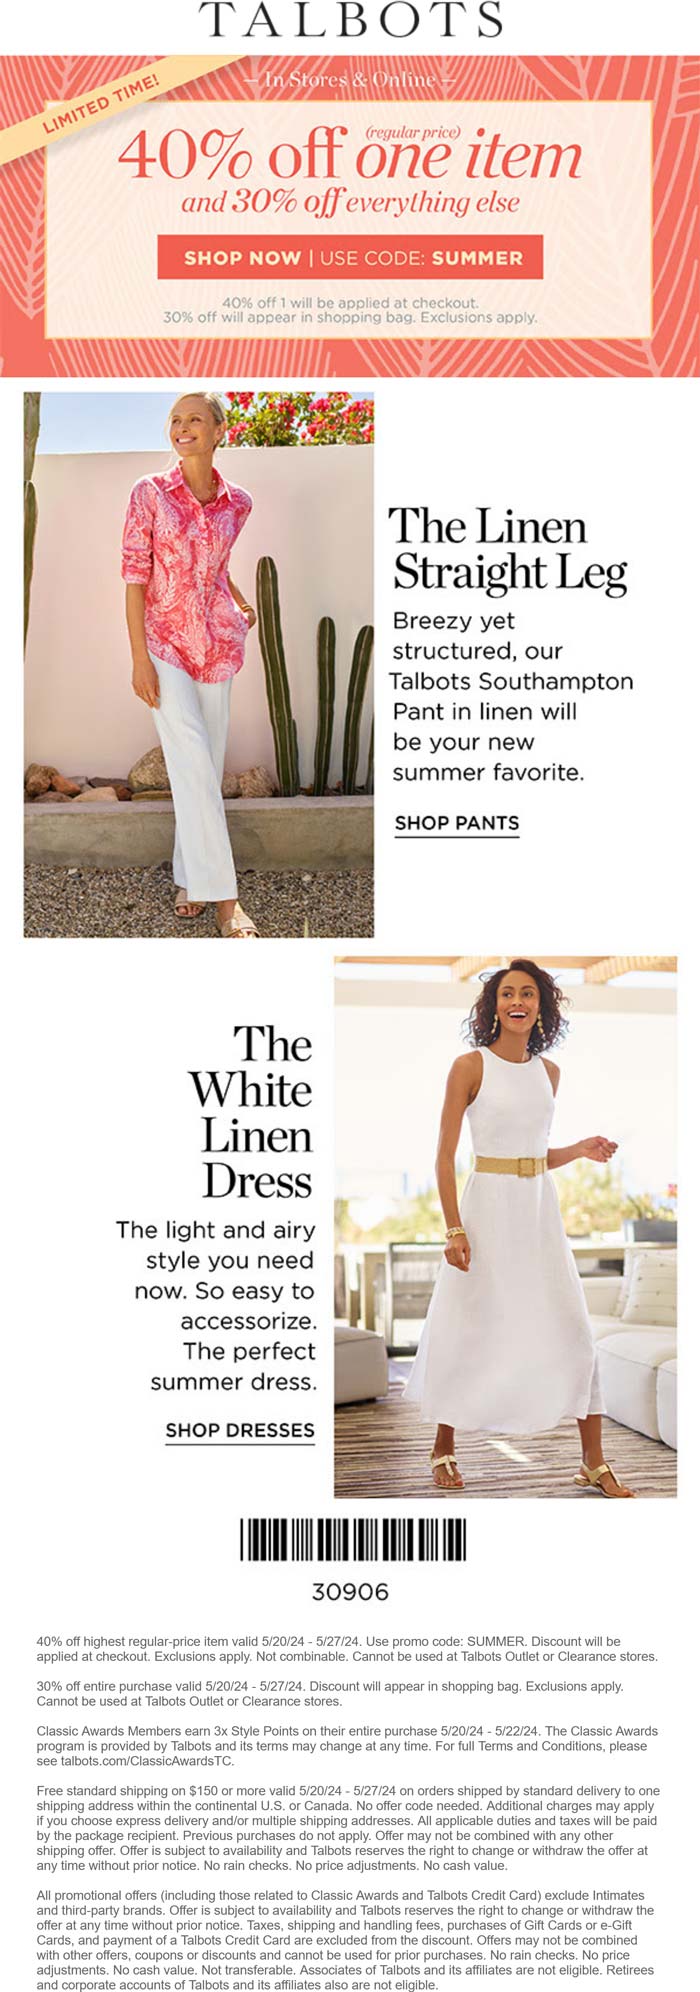 Talbots stores Coupon  40% off a single item & more at Talbots, or online via promo code SUMMER #talbots 